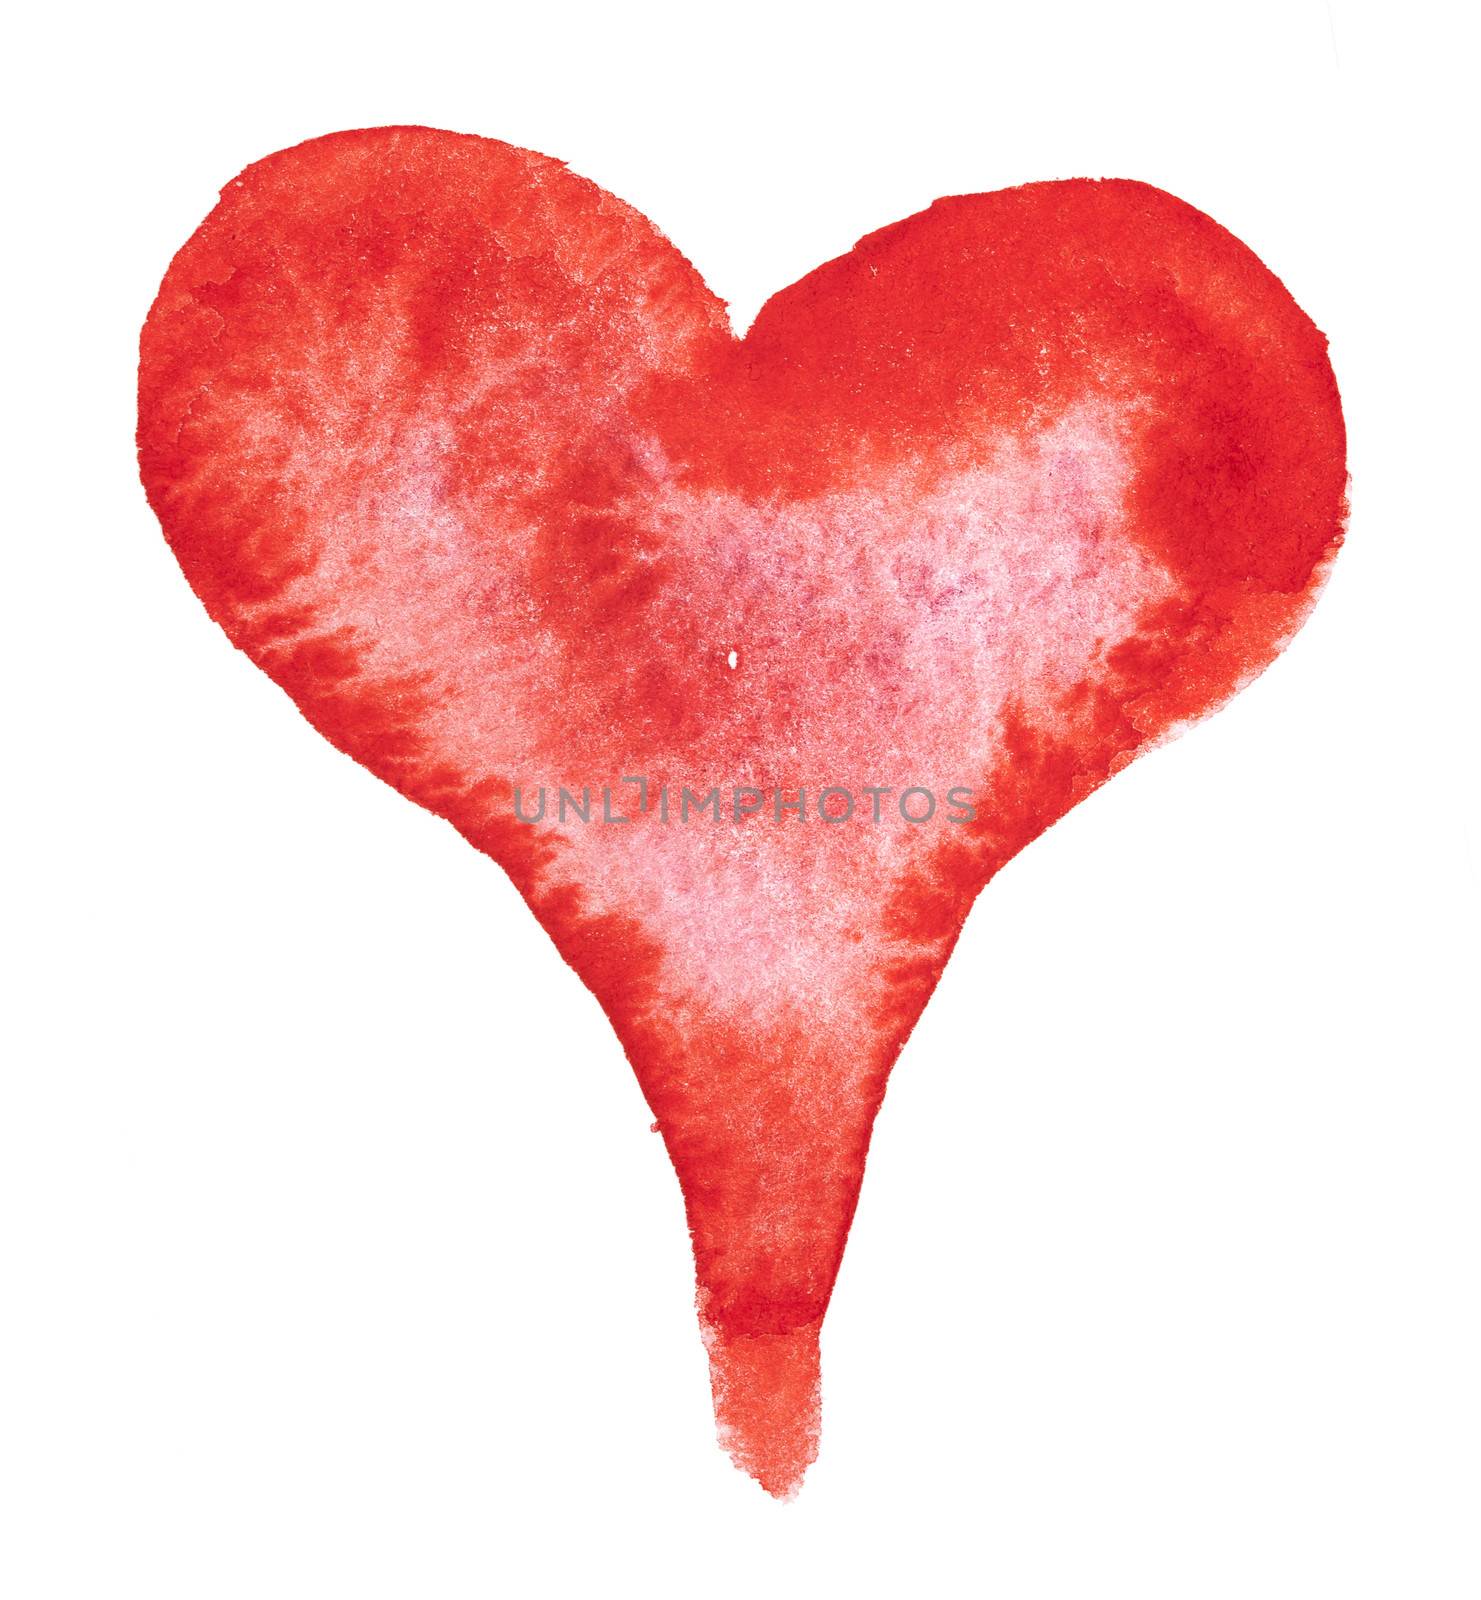 Watercolor painted red heart by anelina